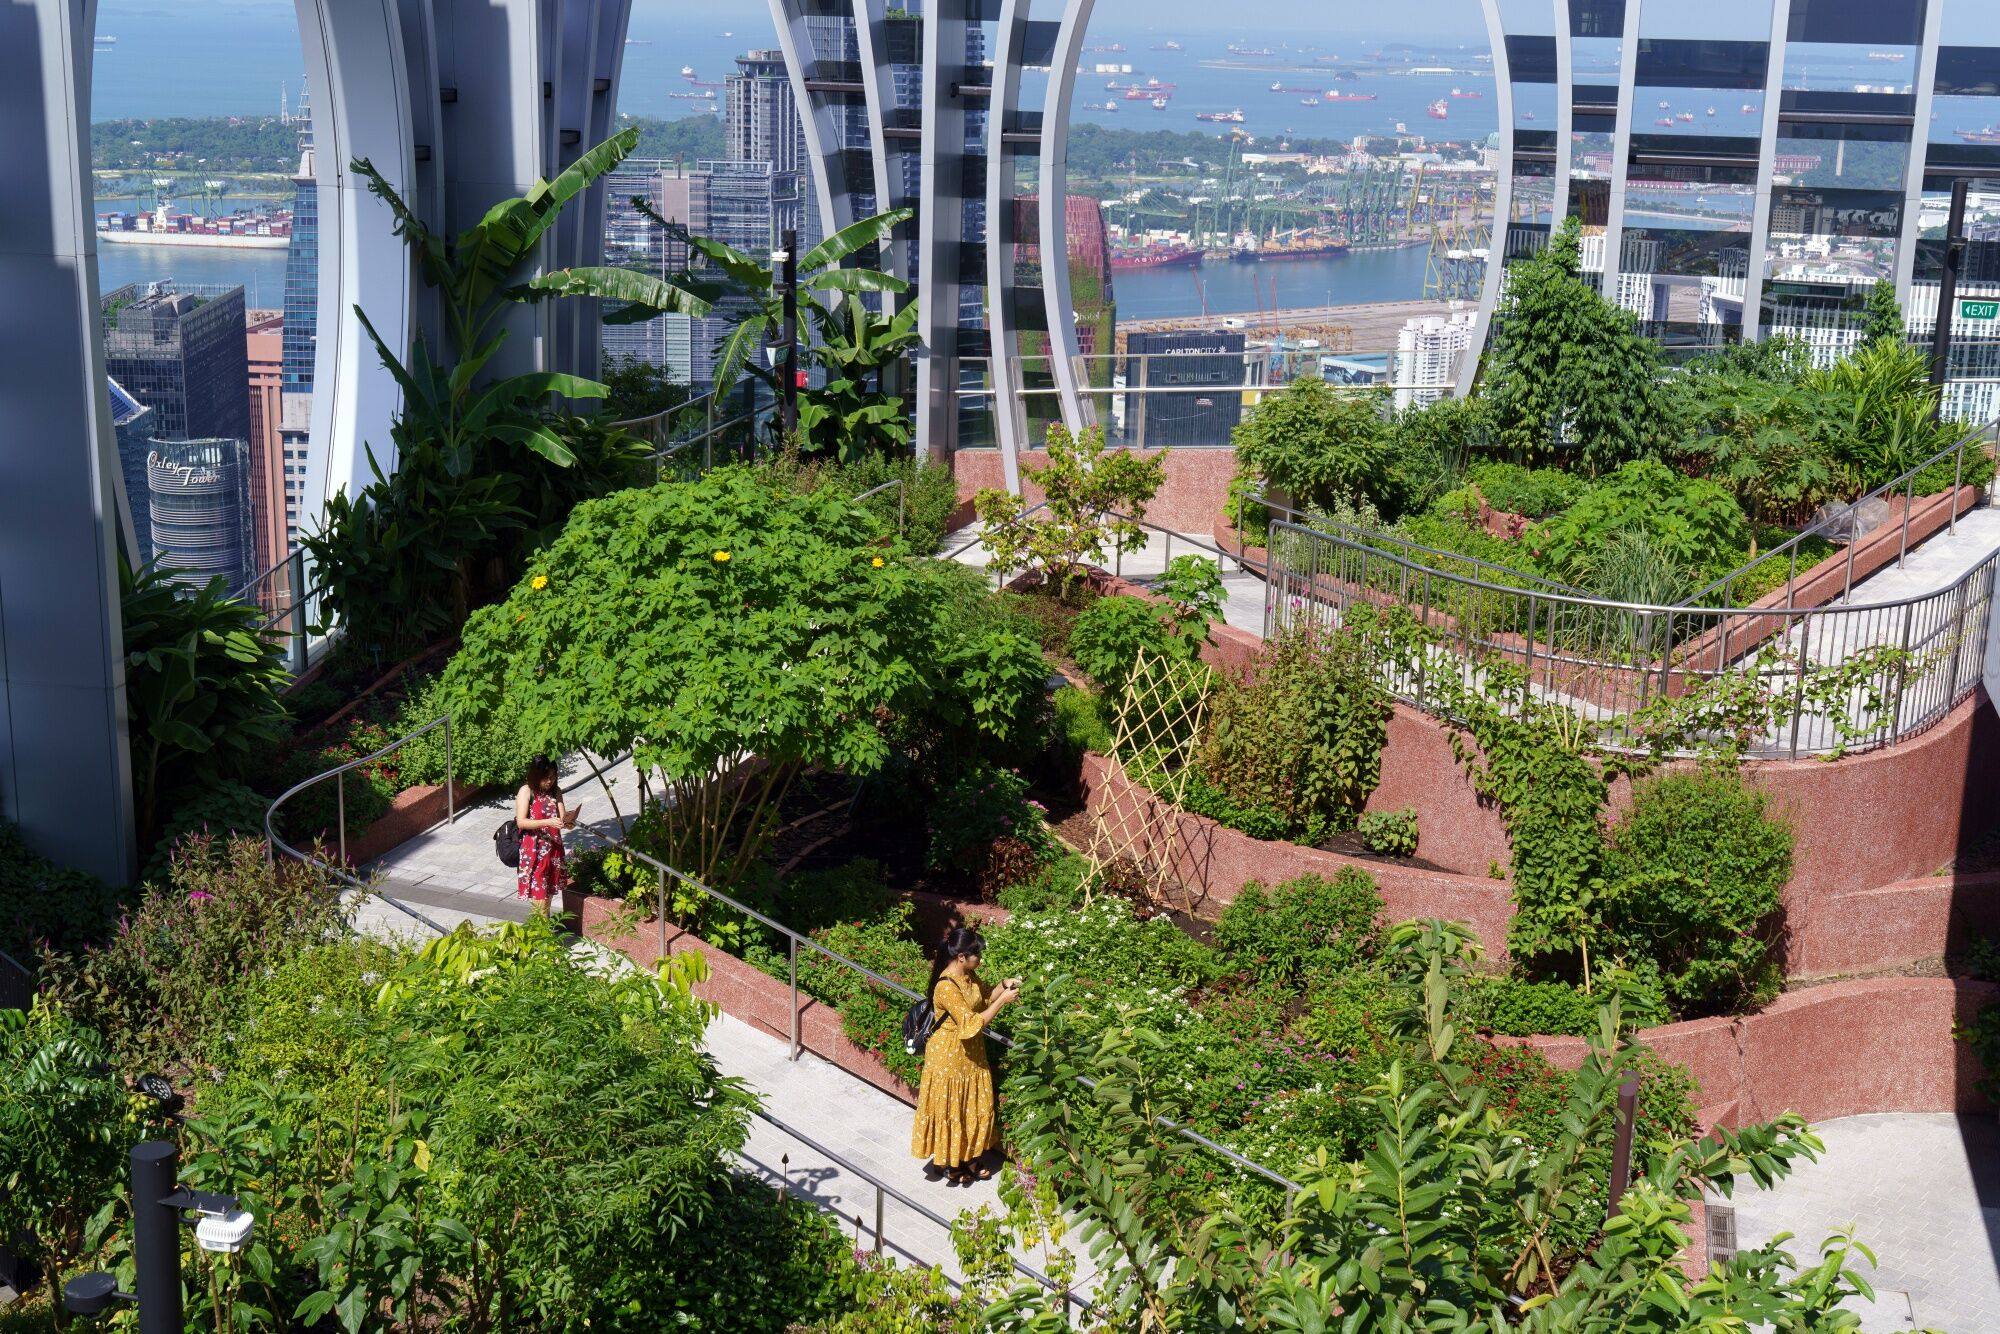 Singapore, through advanced technology and precise urban design, is creating a lush and thriving cityscape, even in vertical space. Photo: Bloomberg